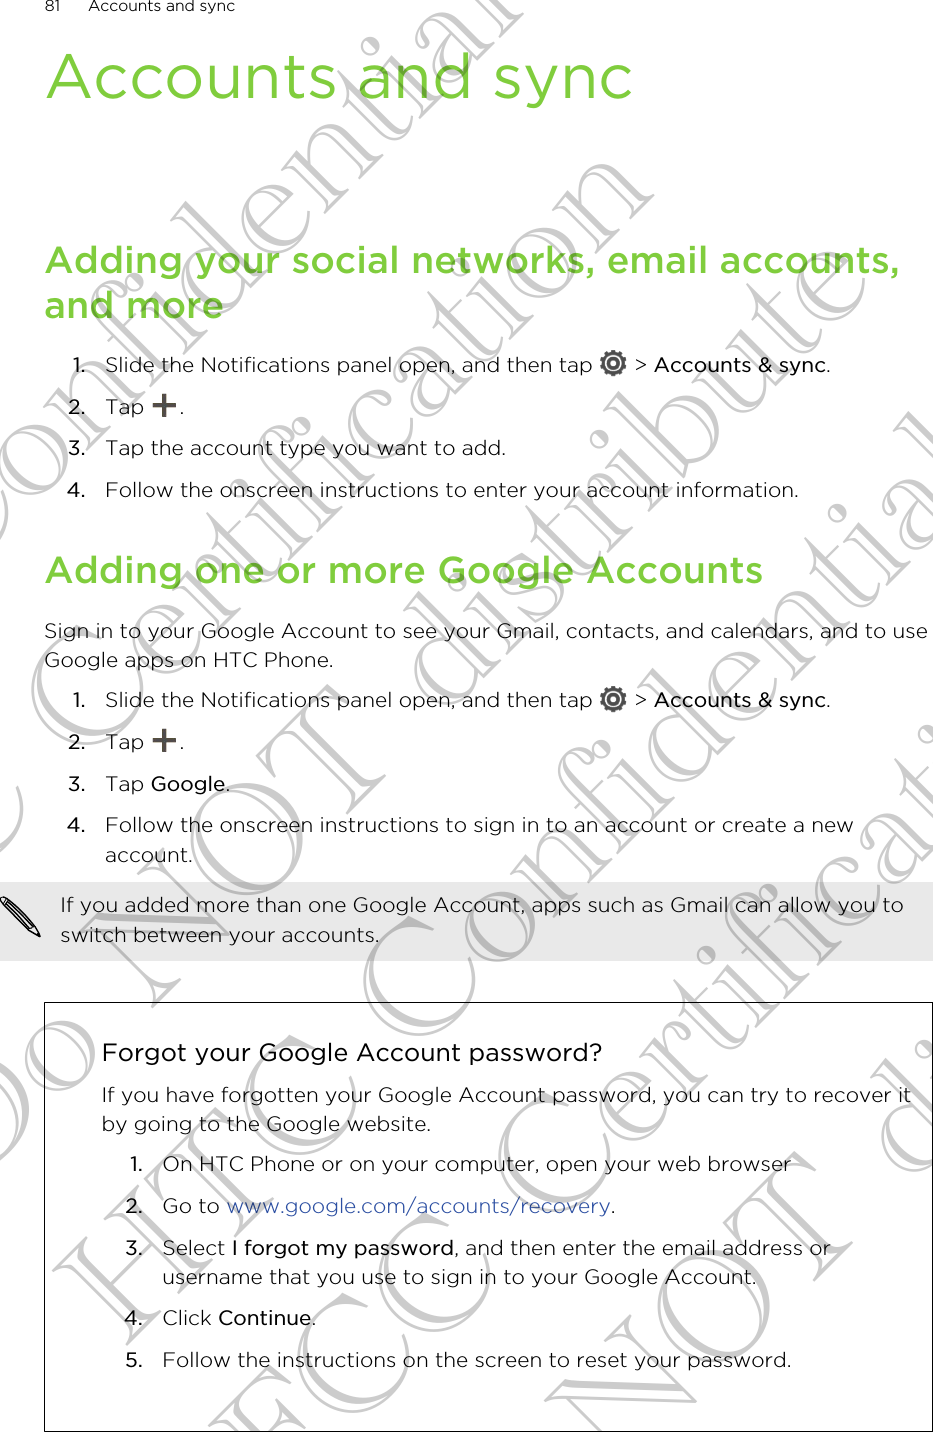 Accounts and syncAdding your social networks, email accounts,and more1. Slide the Notifications panel open, and then tap   &gt; Accounts &amp; sync.2. Tap  .3. Tap the account type you want to add.4. Follow the onscreen instructions to enter your account information.Adding one or more Google AccountsSign in to your Google Account to see your Gmail, contacts, and calendars, and to useGoogle apps on HTC Phone.1. Slide the Notifications panel open, and then tap   &gt; Accounts &amp; sync.2. Tap  .3. Tap Google.4. Follow the onscreen instructions to sign in to an account or create a newaccount.If you added more than one Google Account, apps such as Gmail can allow you toswitch between your accounts.Forgot your Google Account password?If you have forgotten your Google Account password, you can try to recover itby going to the Google website.1. On HTC Phone or on your computer, open your web browser2. Go to www.google.com/accounts/recovery.3. Select I forgot my password, and then enter the email address orusername that you use to sign in to your Google Account.4. Click Continue.5. Follow the instructions on the screen to reset your password.81 Accounts and syncHTC Confidential FCC Certification Do NOT distribute HTC Confidential FCC Certification Do NOT distribute